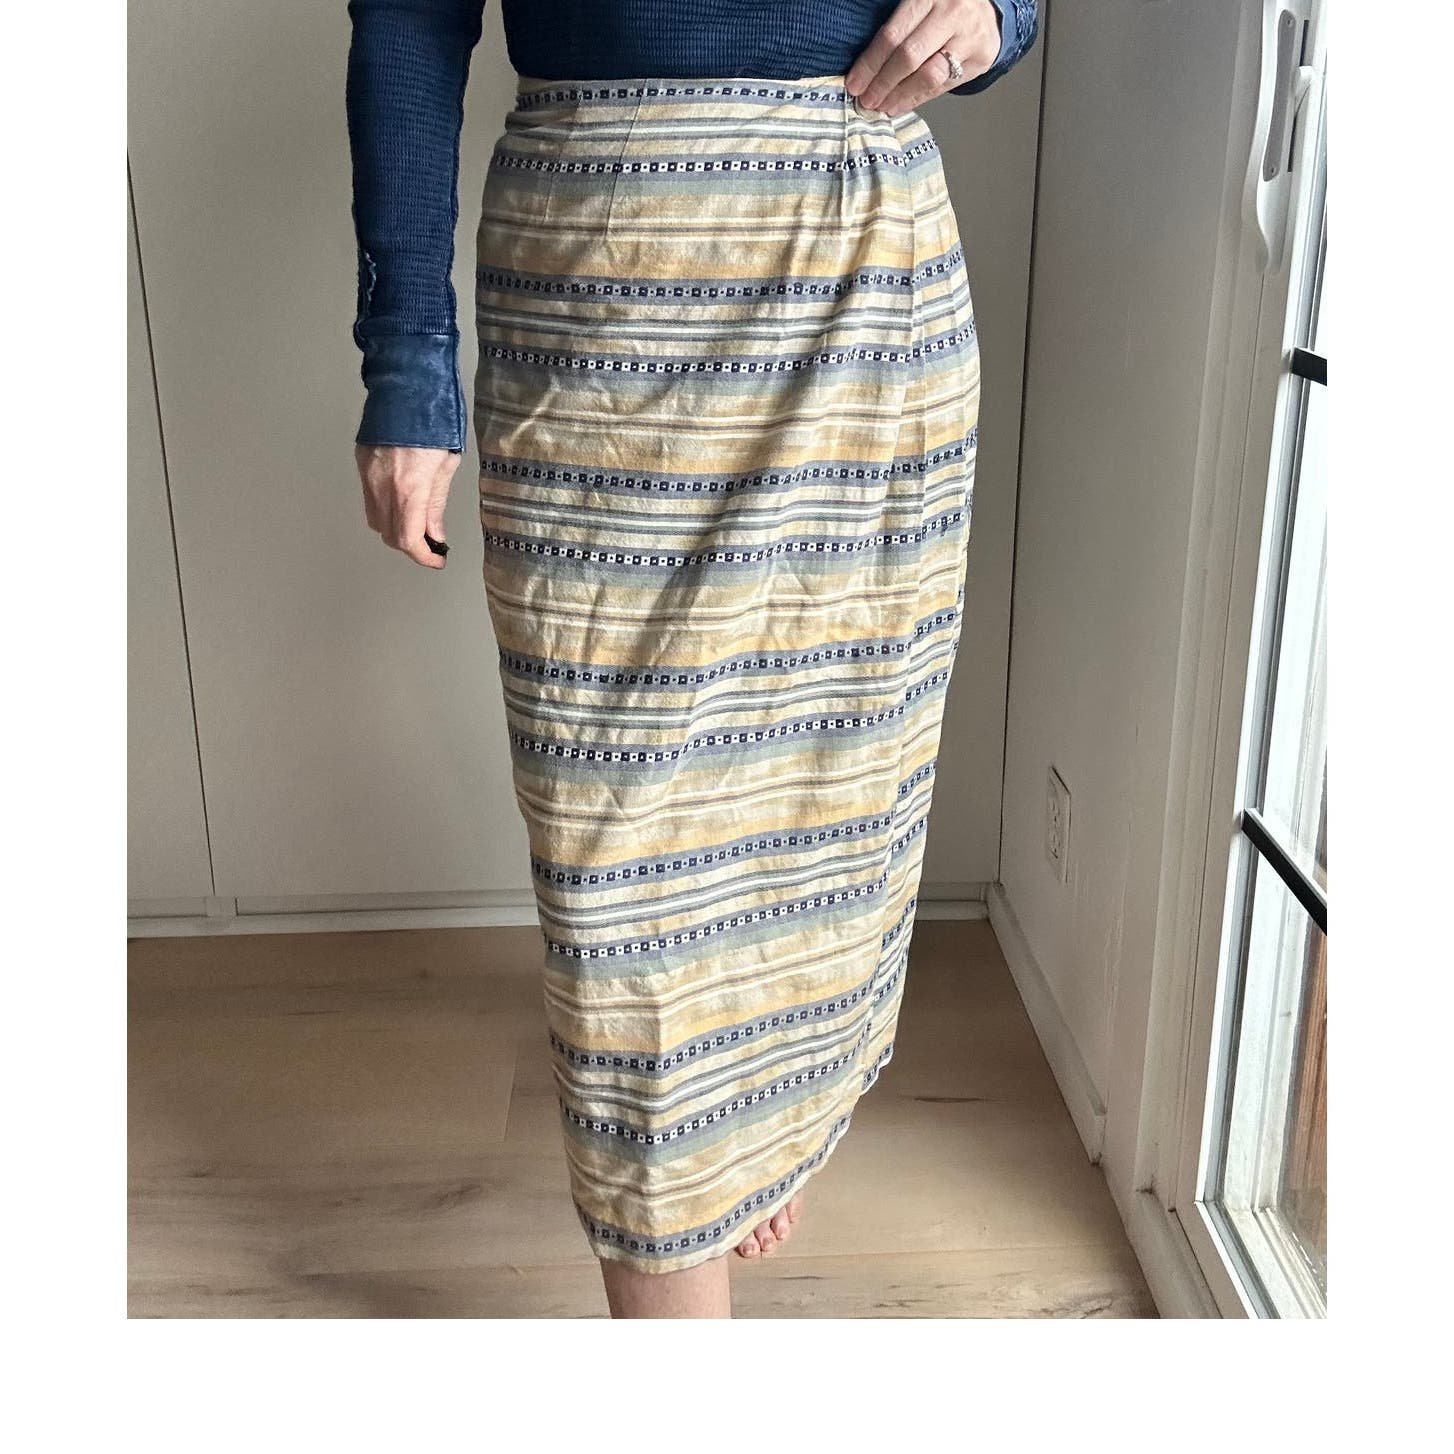 cheapest place to buy  Vintage 90s Country Western Wrap Skirt Southwestern Midi length Cowgirl  Size 8 h0E08ZLIO just for you